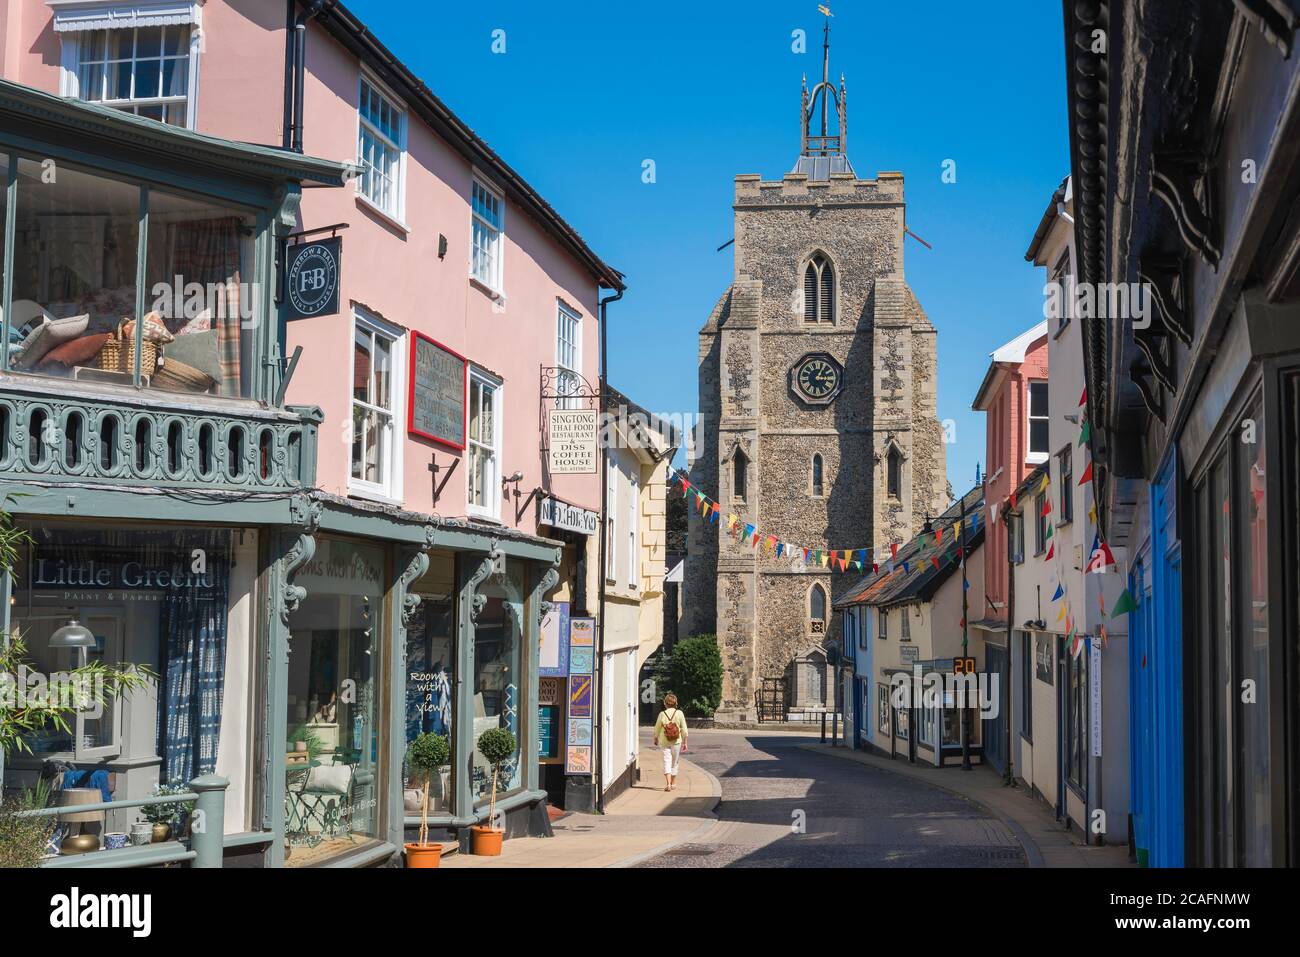 Diss Norfolk UK, view in summer of St Mary's Parish Church and independent shops in St Nicholas Street, Diss, Norfolk, East Anglia, England, UK Stock Photo